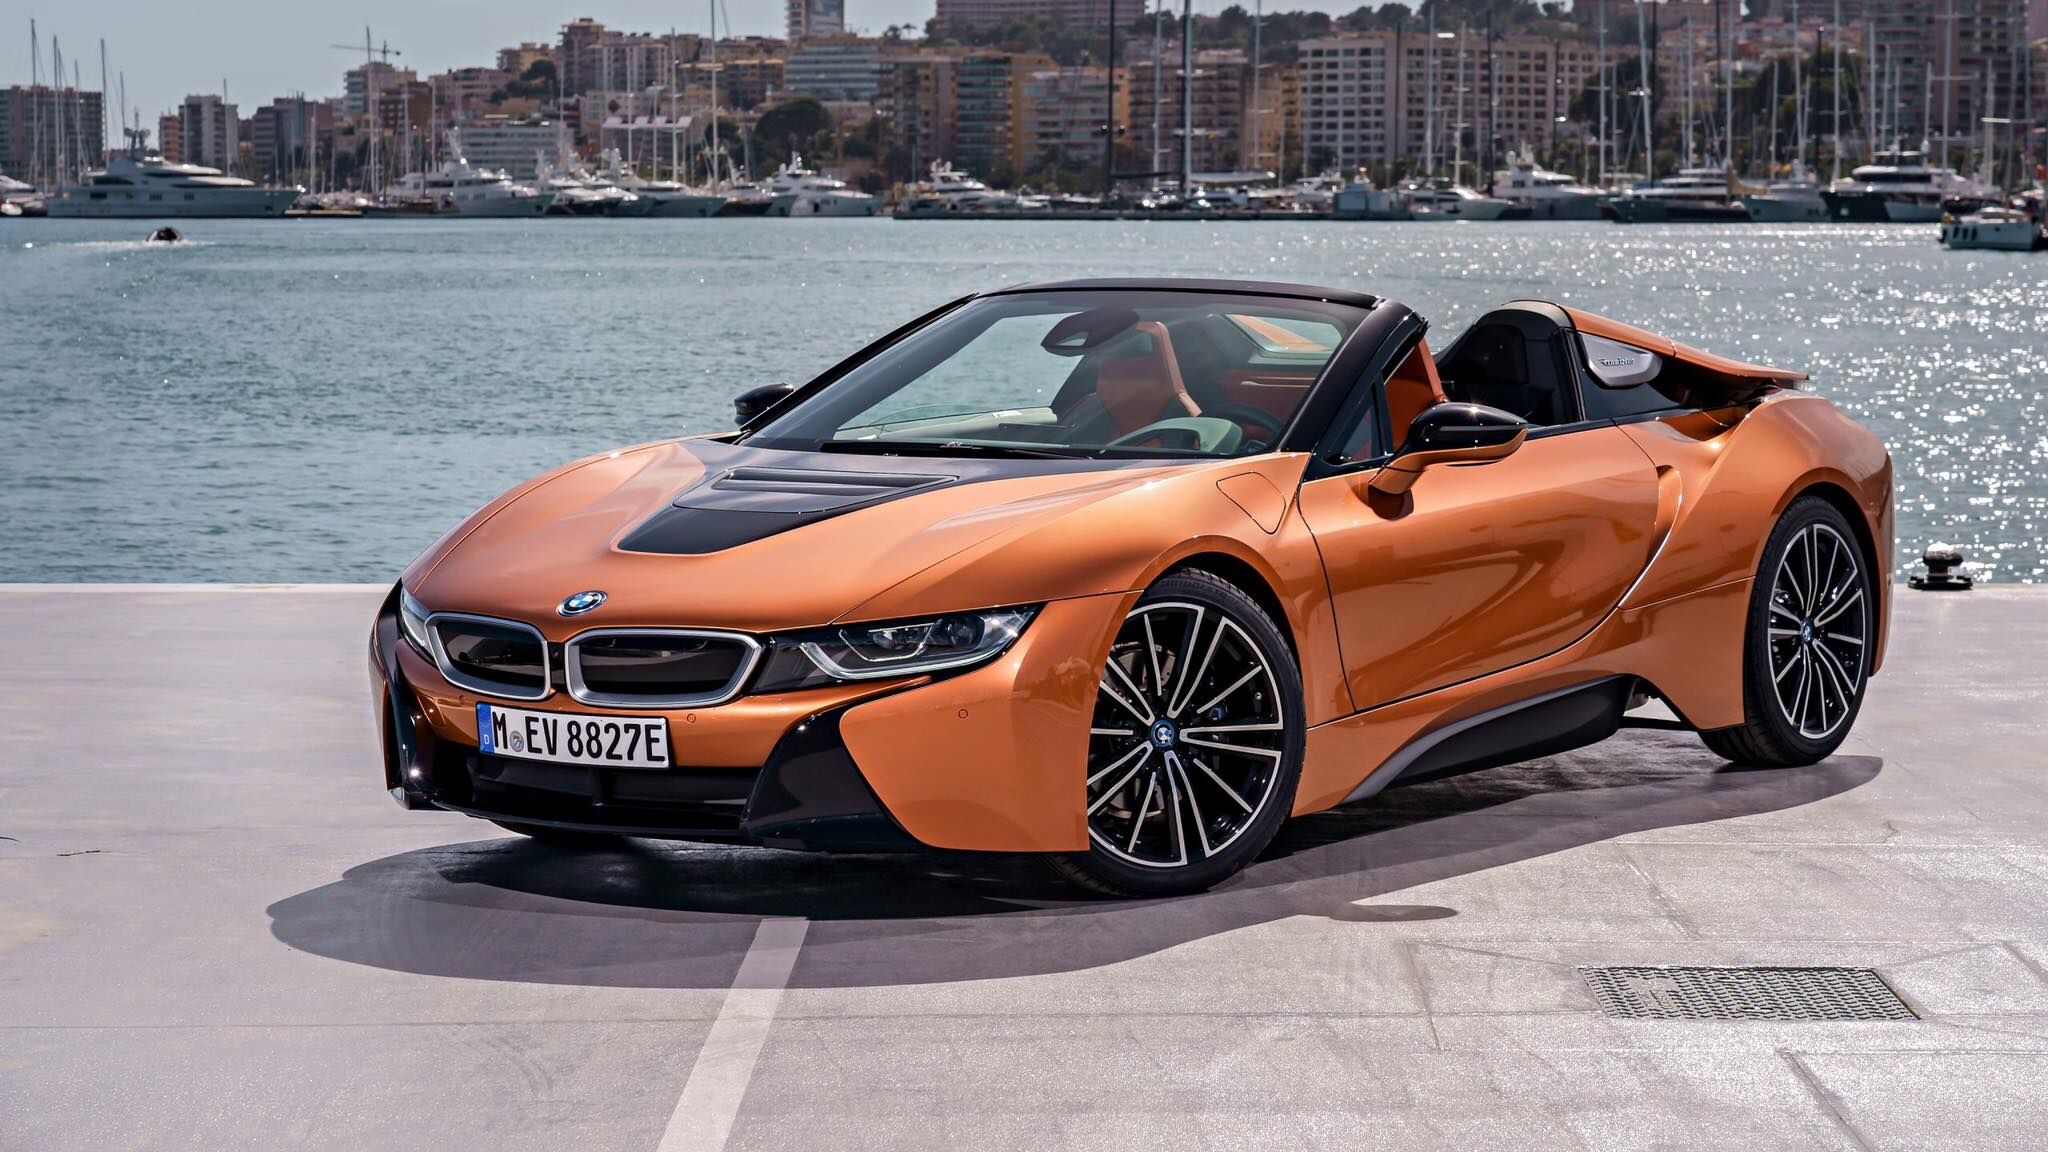 Louis Vuitton creates tailor-made luggage for the BMW i8. Forward